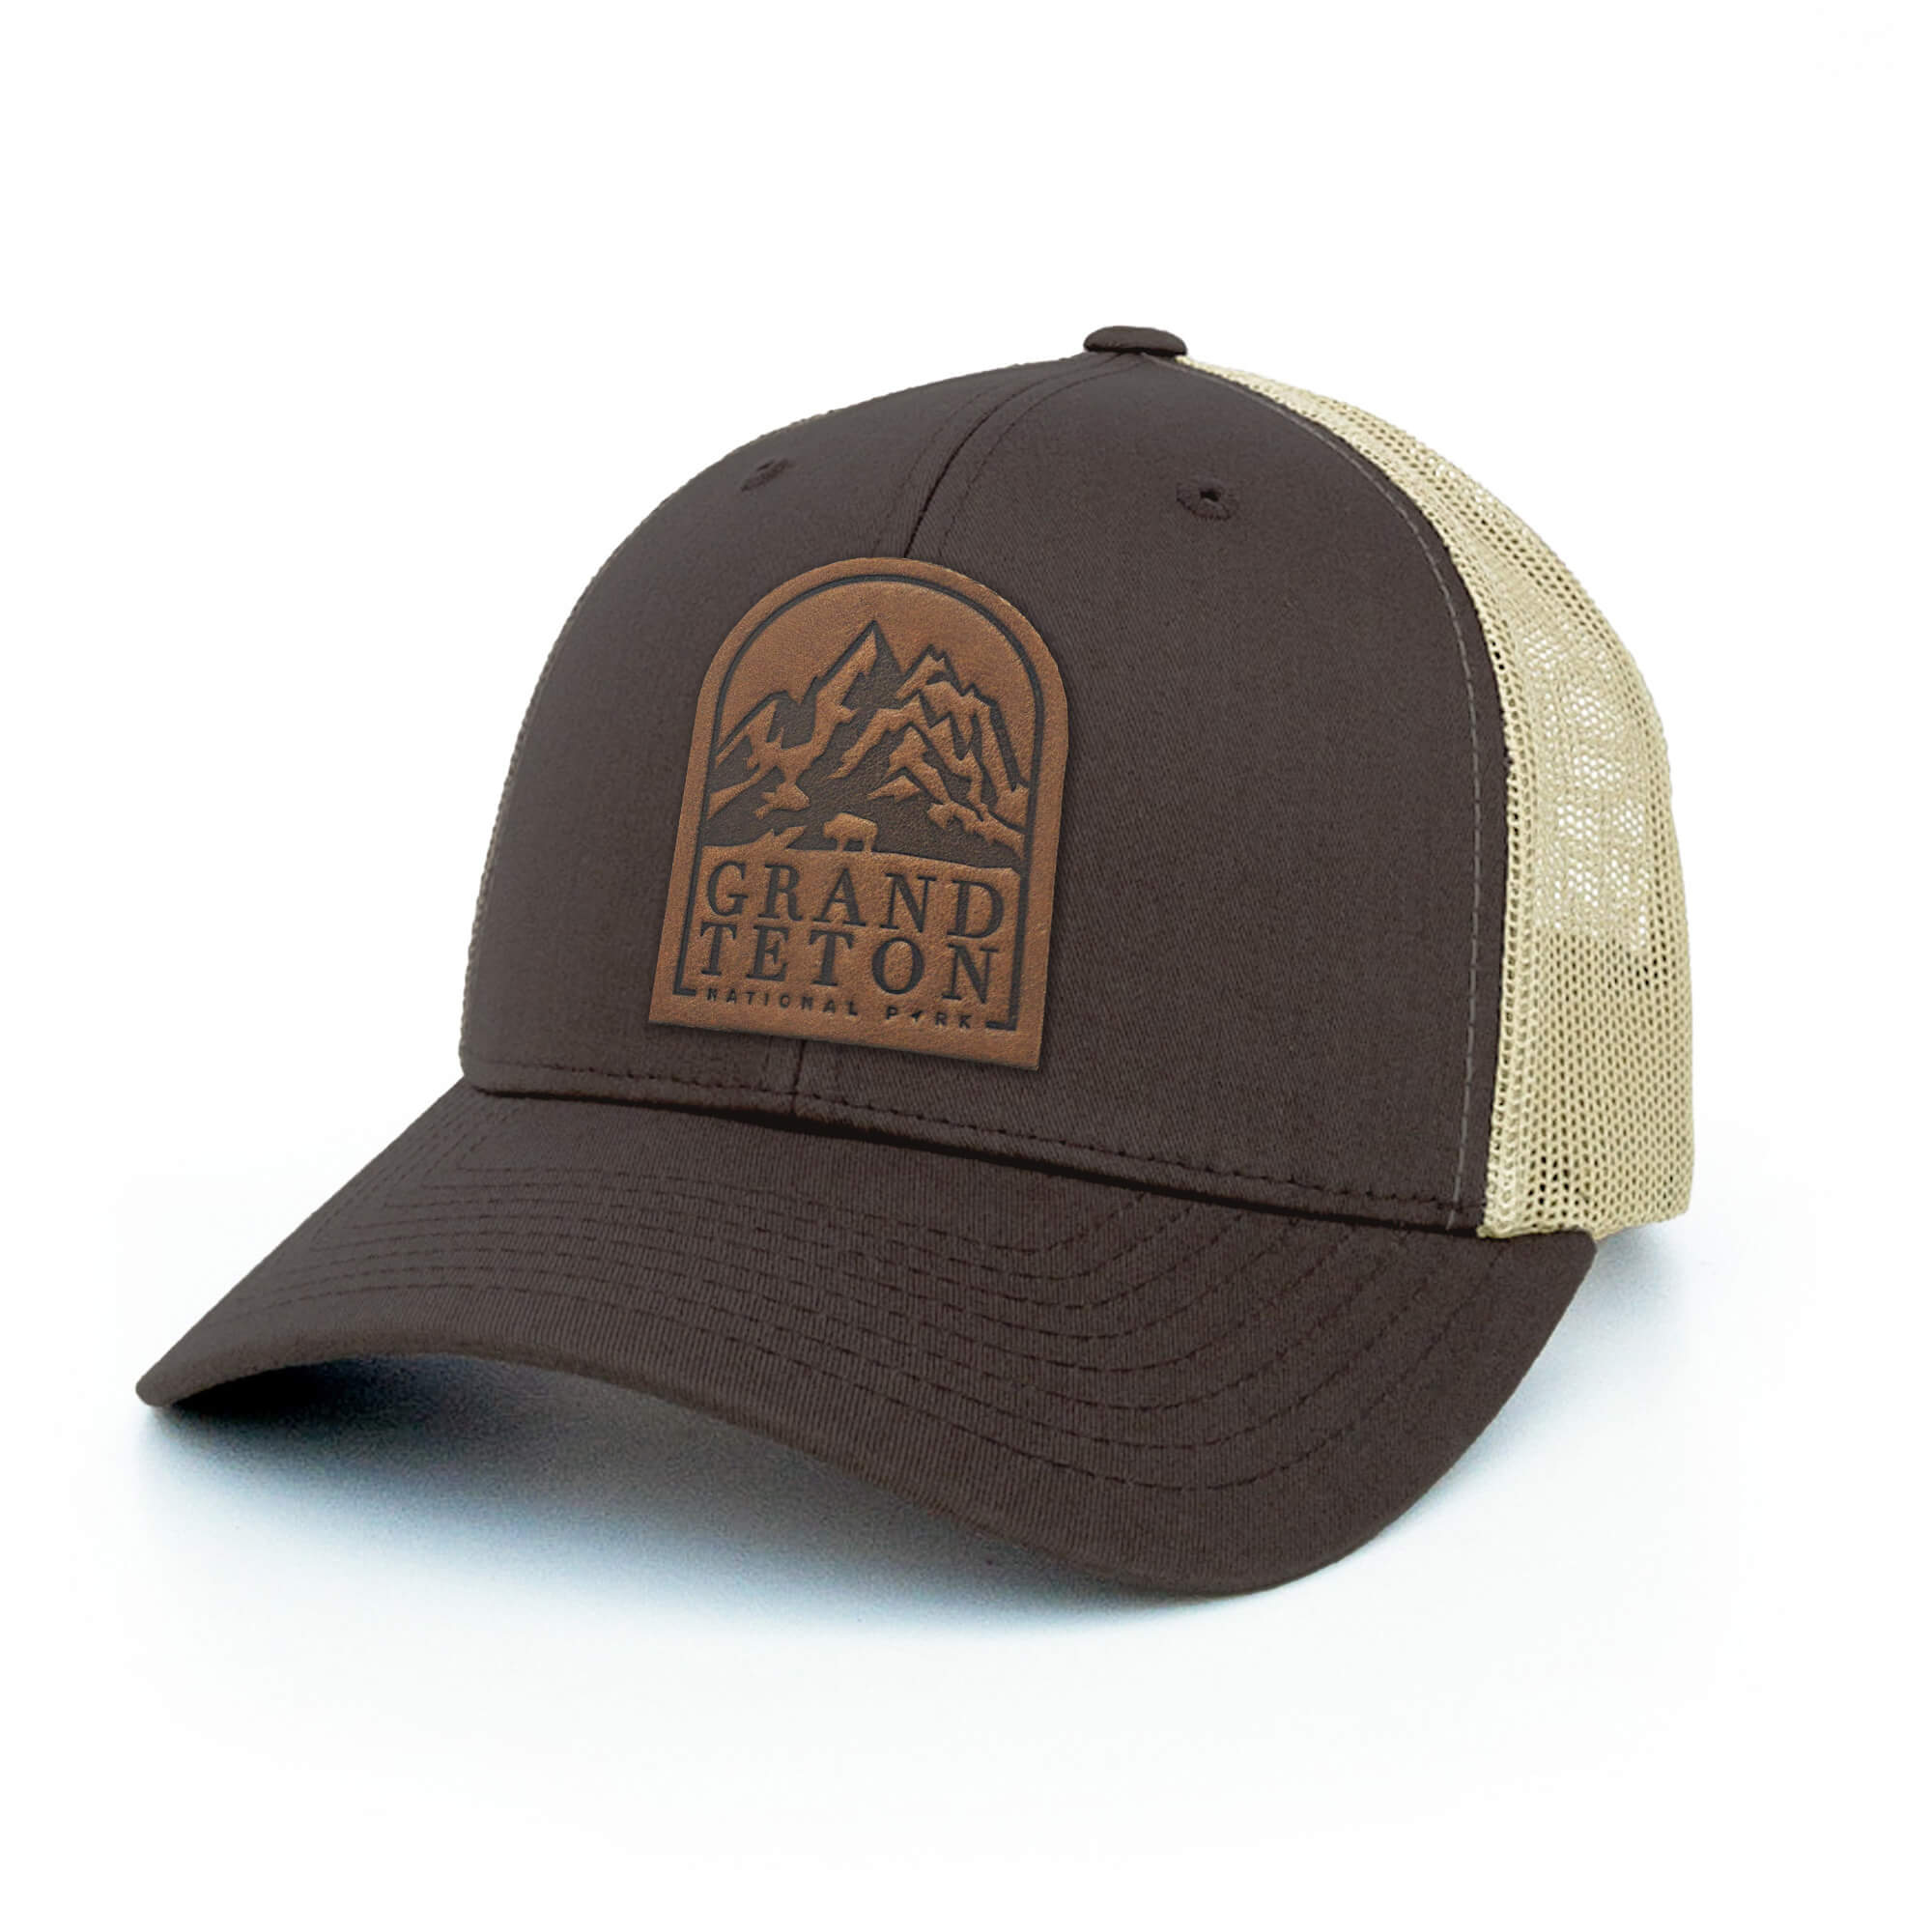 Brown and khaki trucker hat with full-grain leather patch of Grand Teton National Park | BLACK-007-003, CHARC-007-003, NAVY-007-003, HGREY-007-003, MOSS-007-003, BROWN-007-003